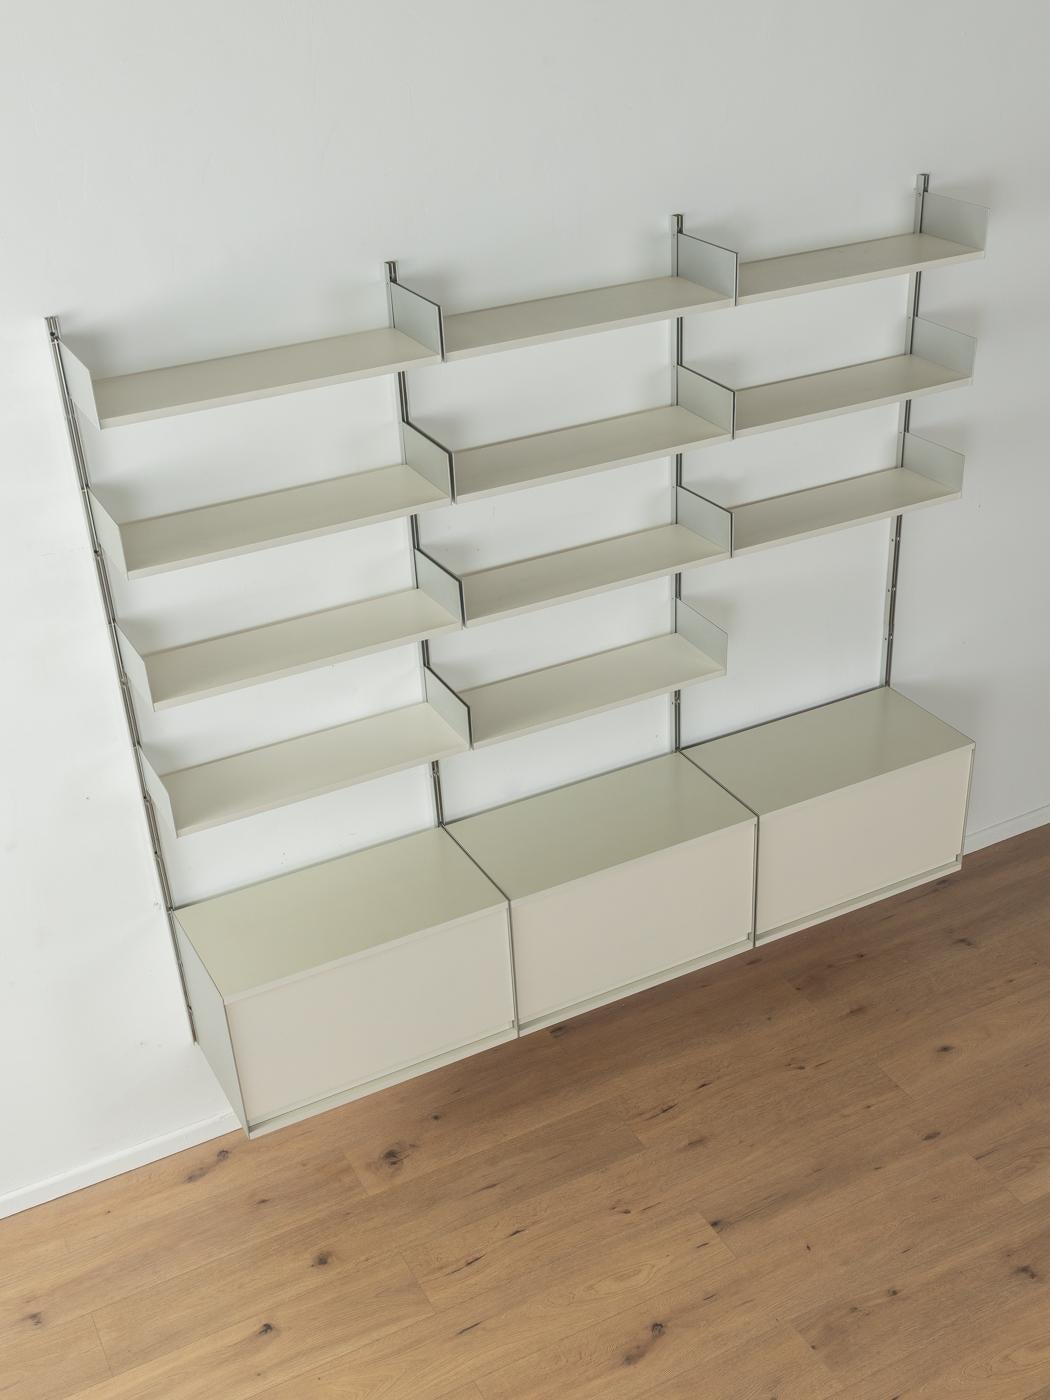  606 Shelving system, Dieter Rams for Vitsœ  In Good Condition For Sale In Neuss, NW